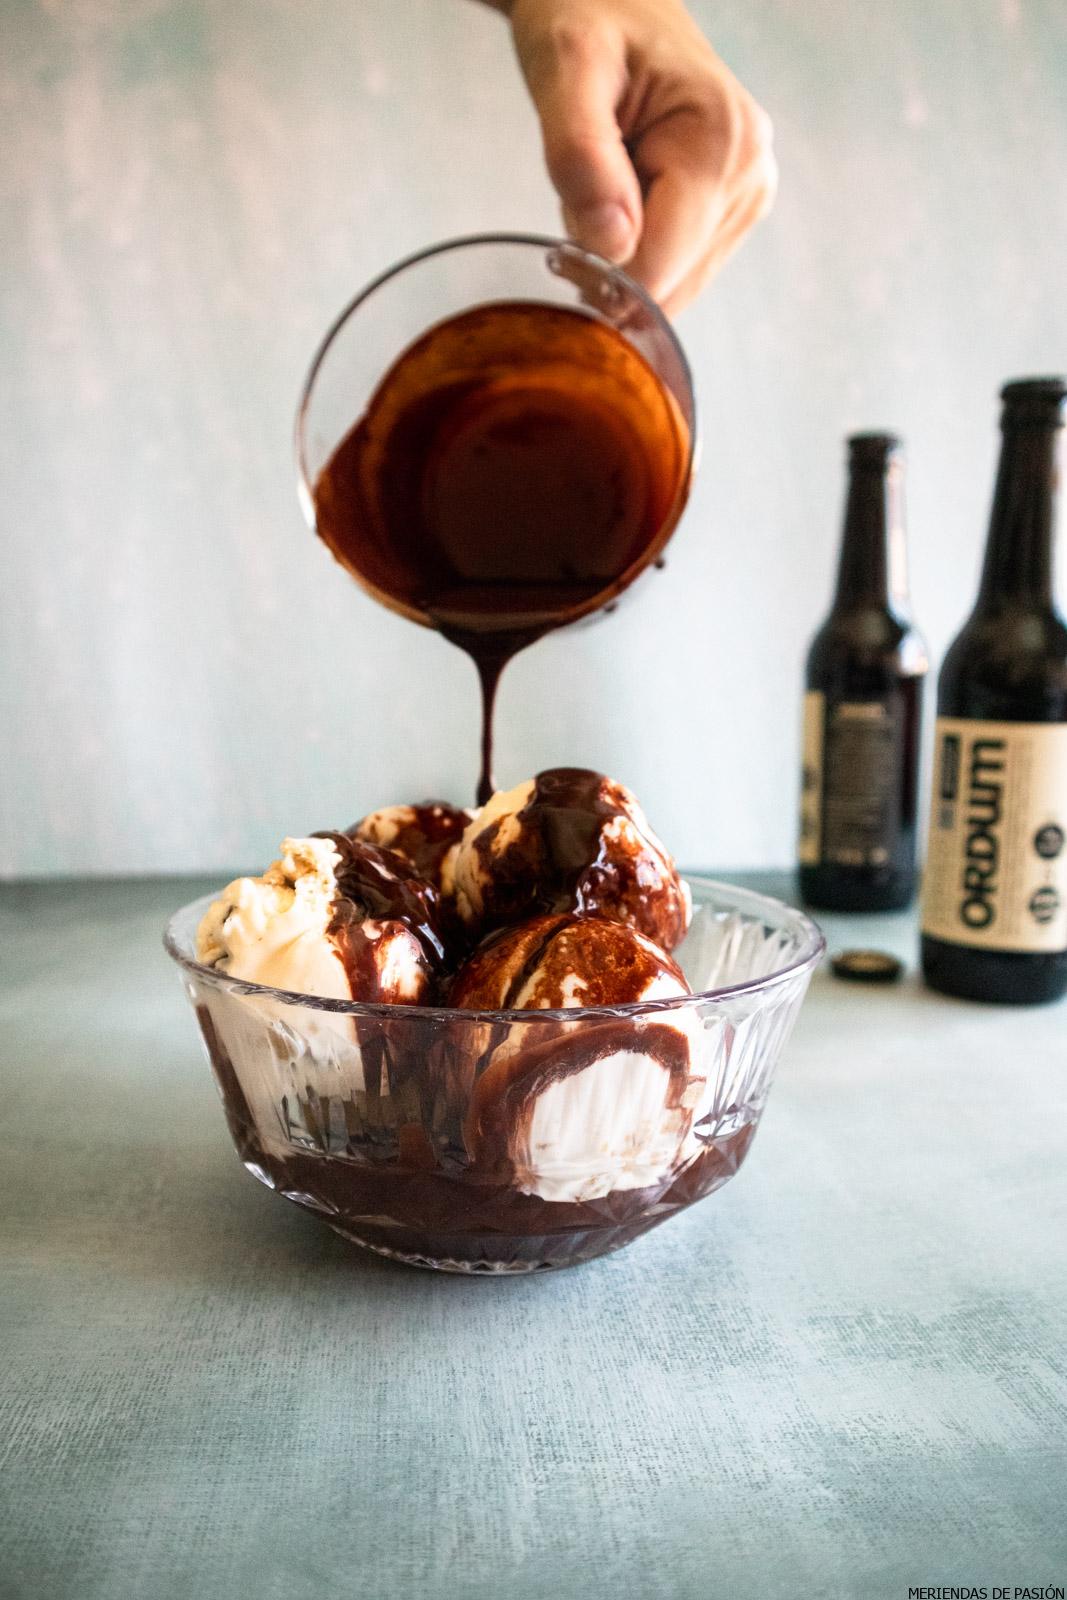 Chocolate Stout Sauce pouring on top of vanilla ice cream